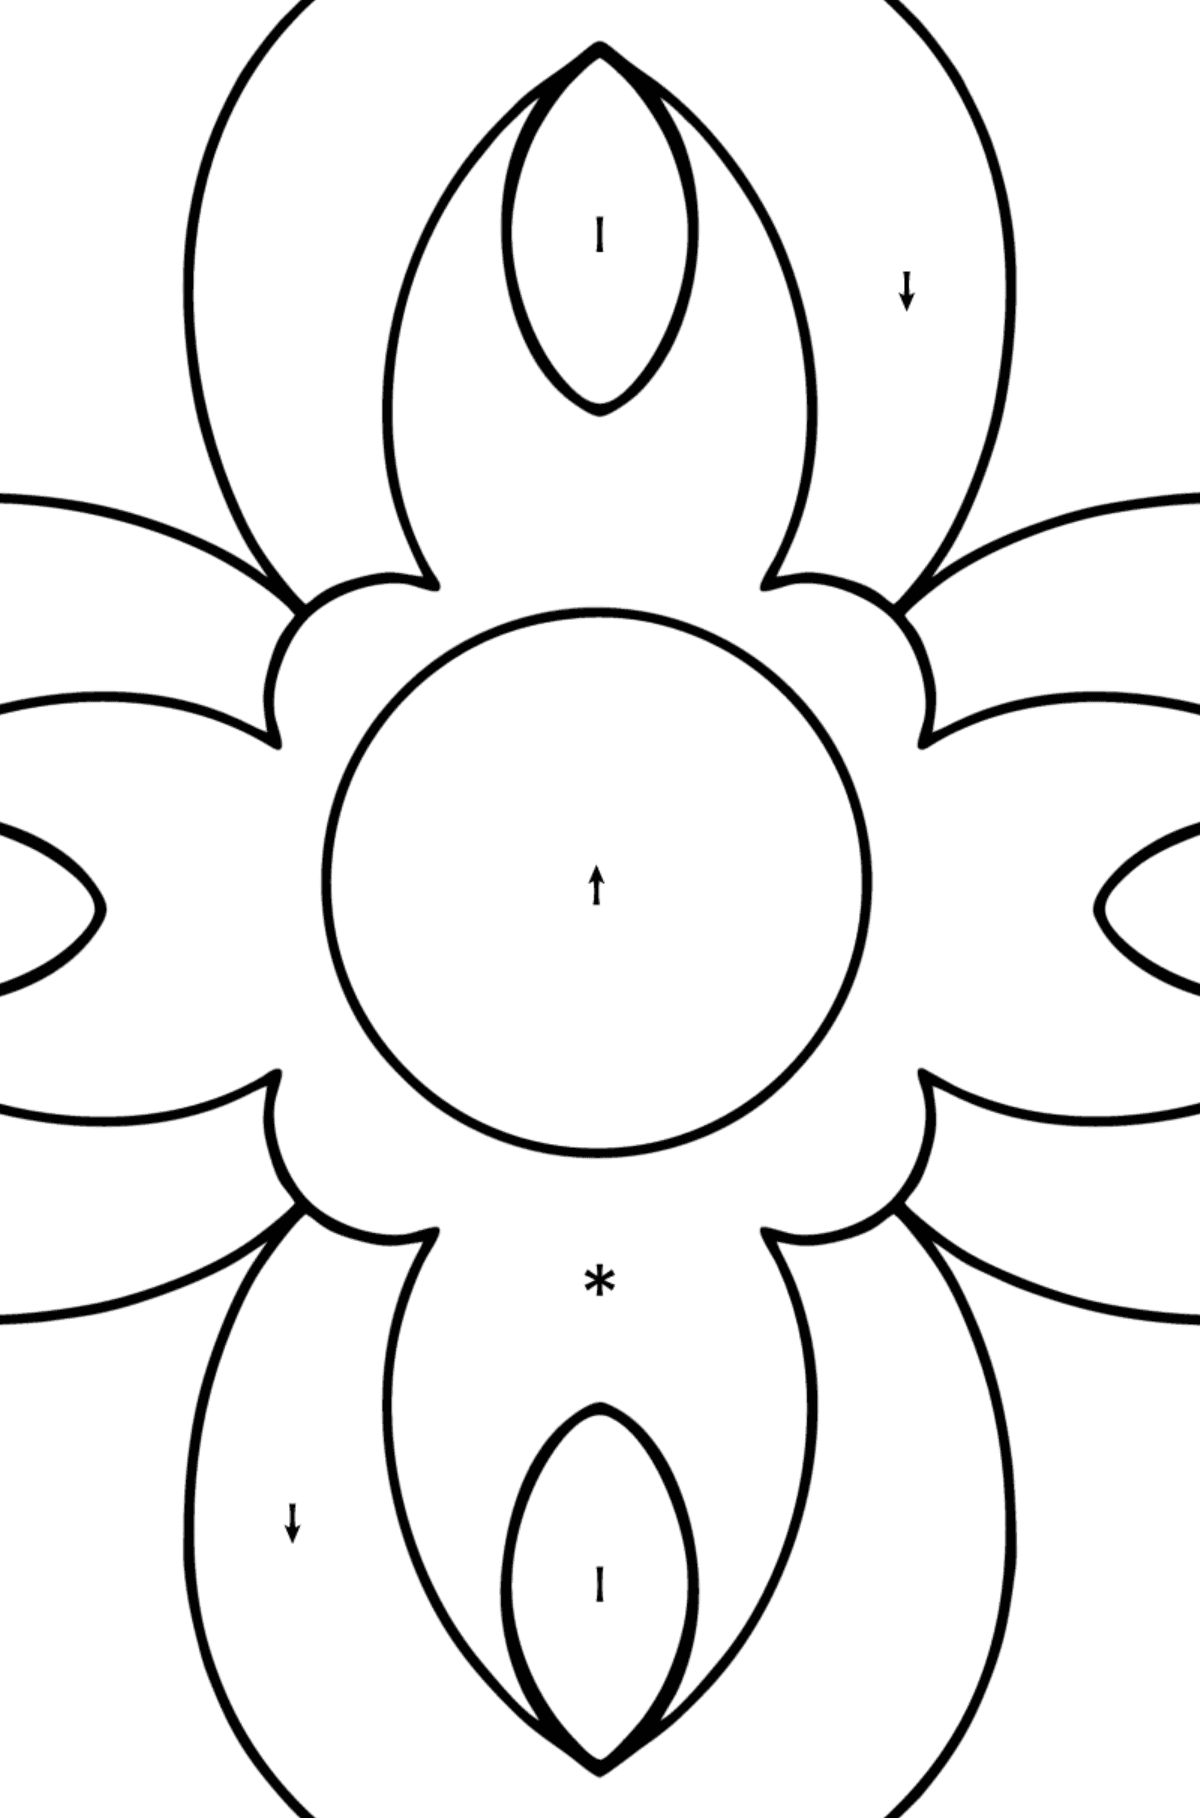 Coloring book for kids - Anti stress flower - Coloring by Symbols for Kids